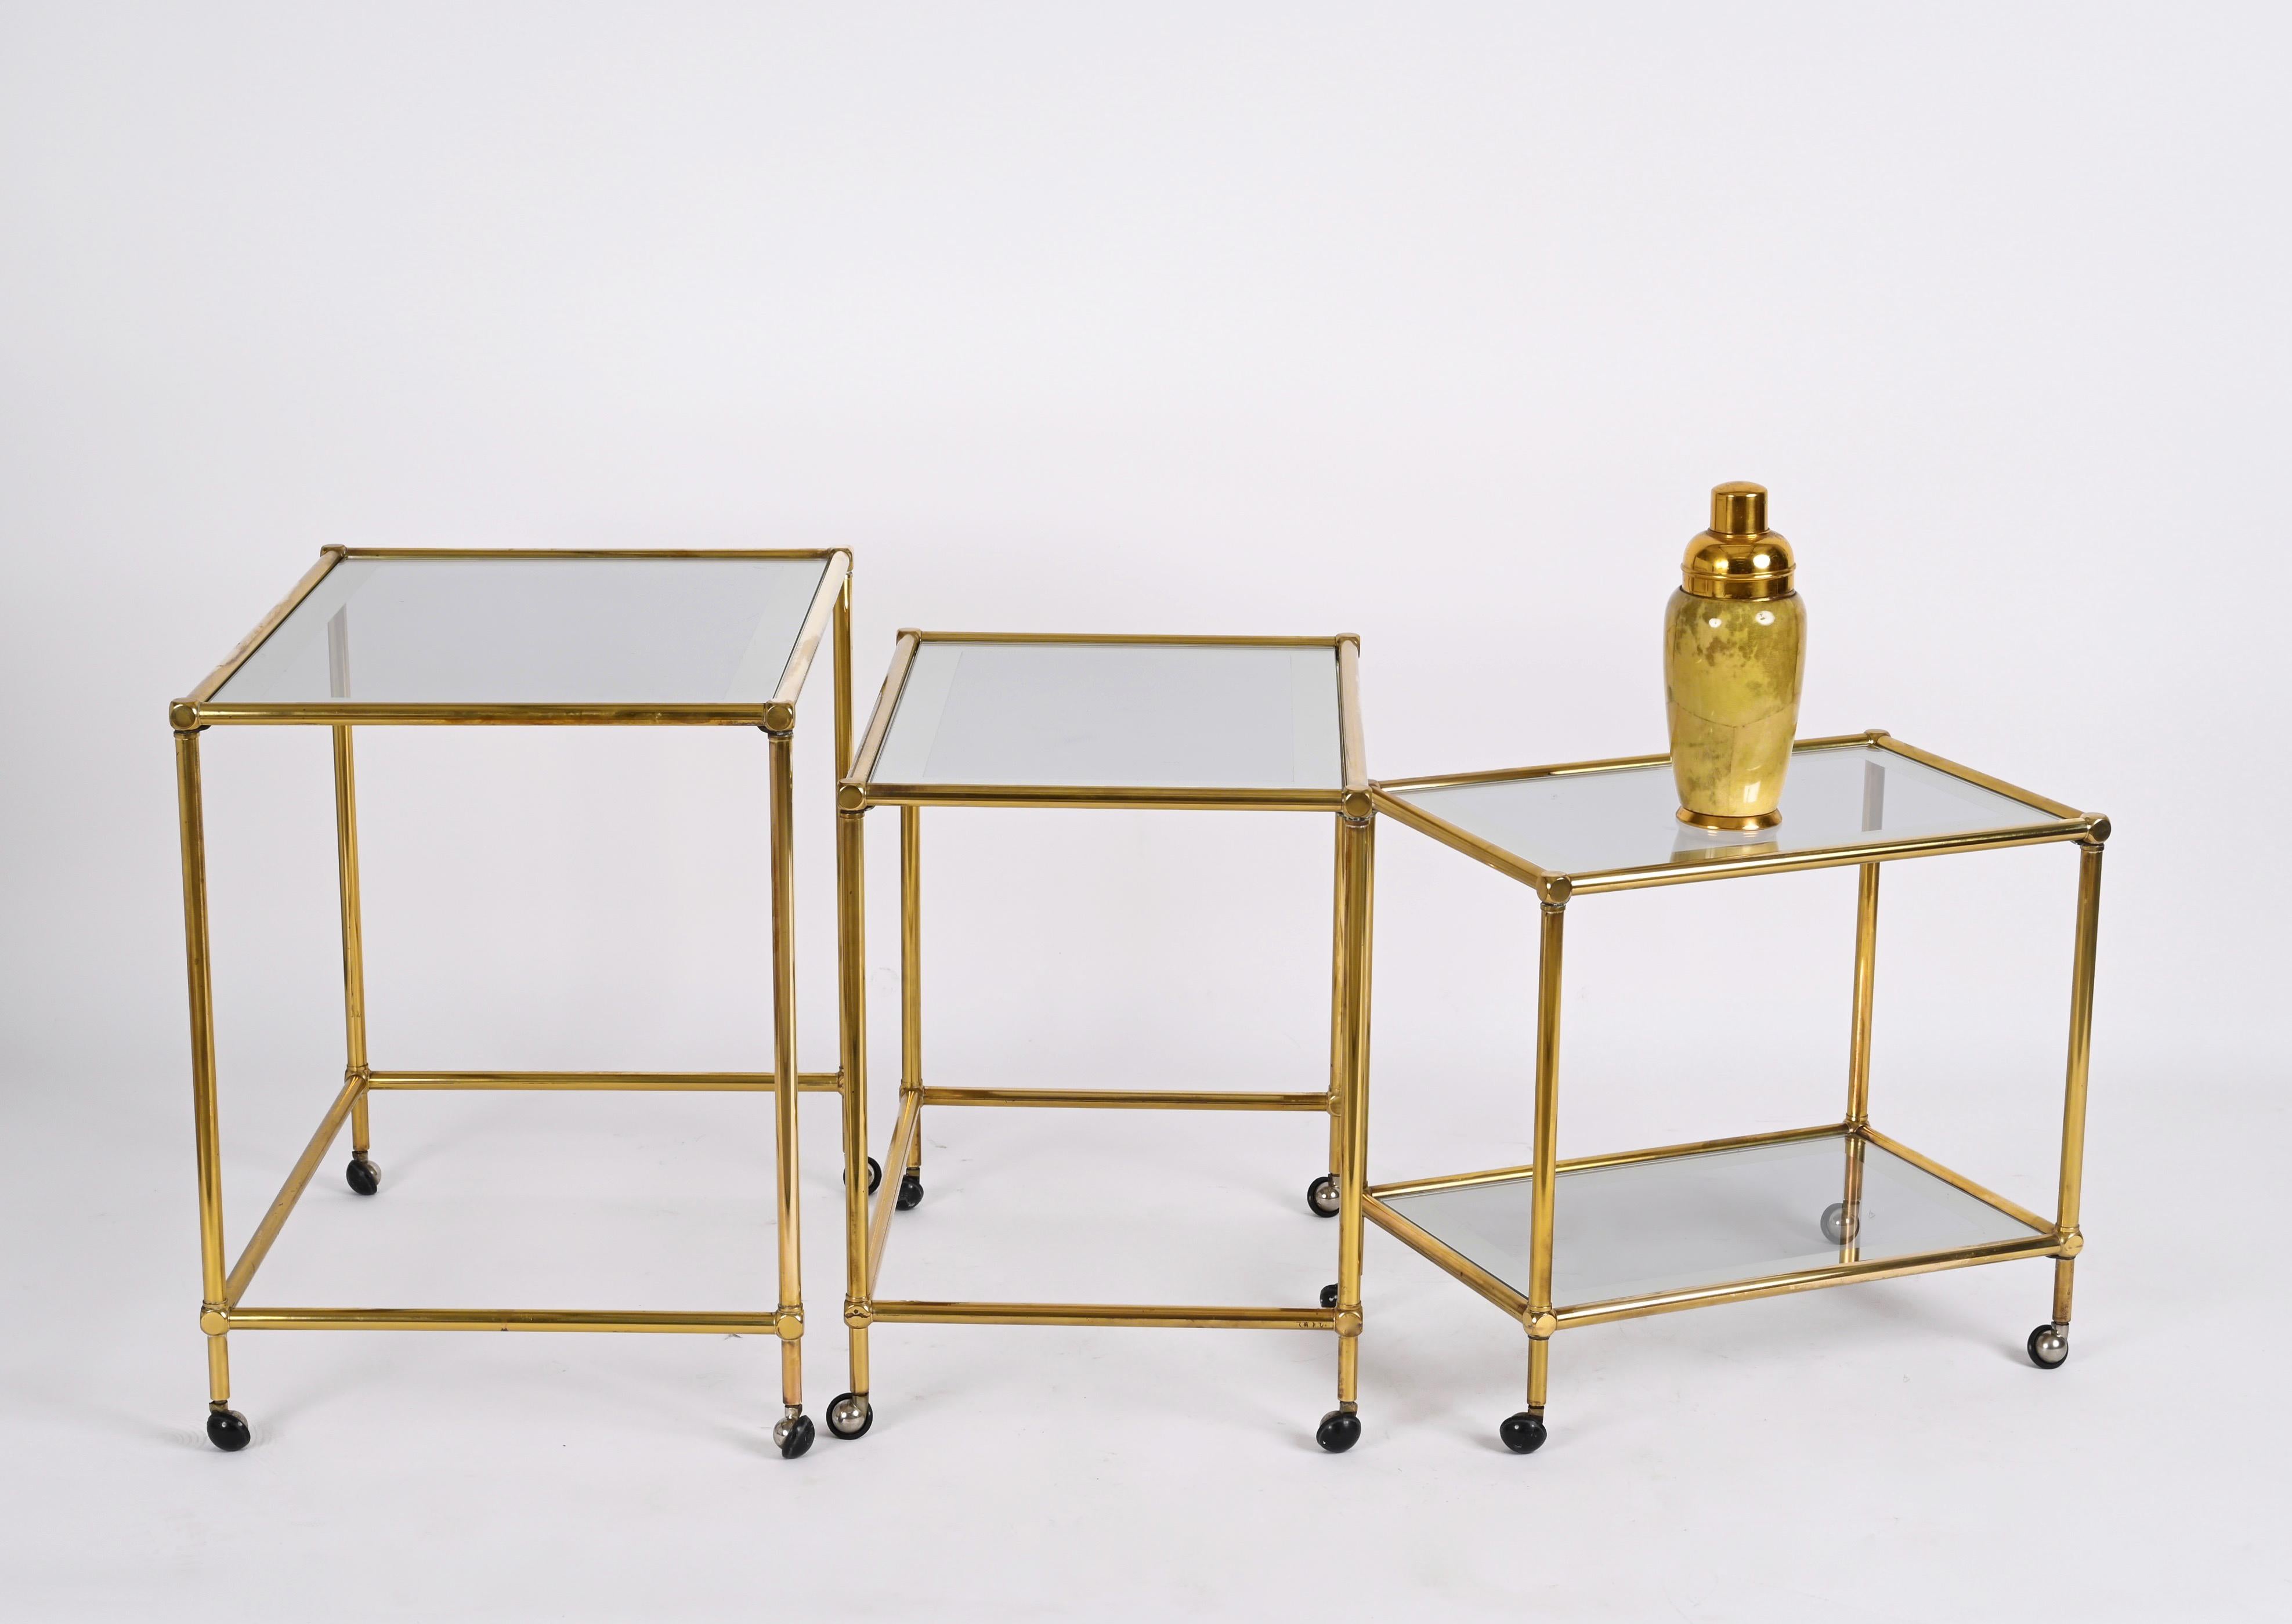 Set of Brass Mirrored Border with Glass Top Nesting Tables, Maison Jansen, 1970s For Sale 5